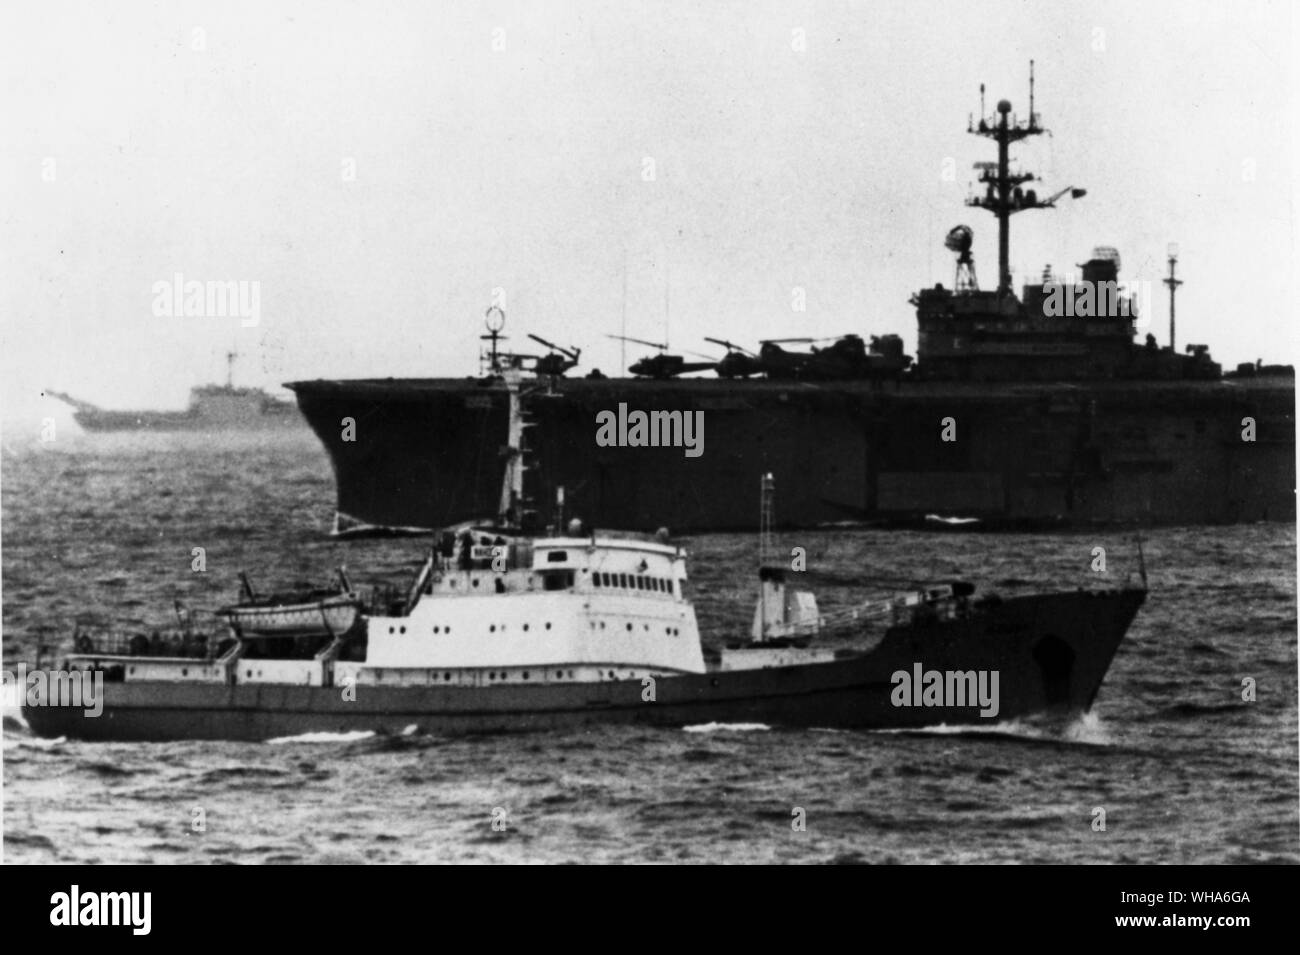 The Soviet Intelligence collection trawler Nakhodka passes amid ships participating in the Nato exercises Strong Express in the Norwegian sea 140 miles off Andoya, Norway.. This trawler passes infront of US helicopter carrier USS Inchon and the tank landing ship USS Fairfax County left and rear.. 22nd September 1972 Stock Photo